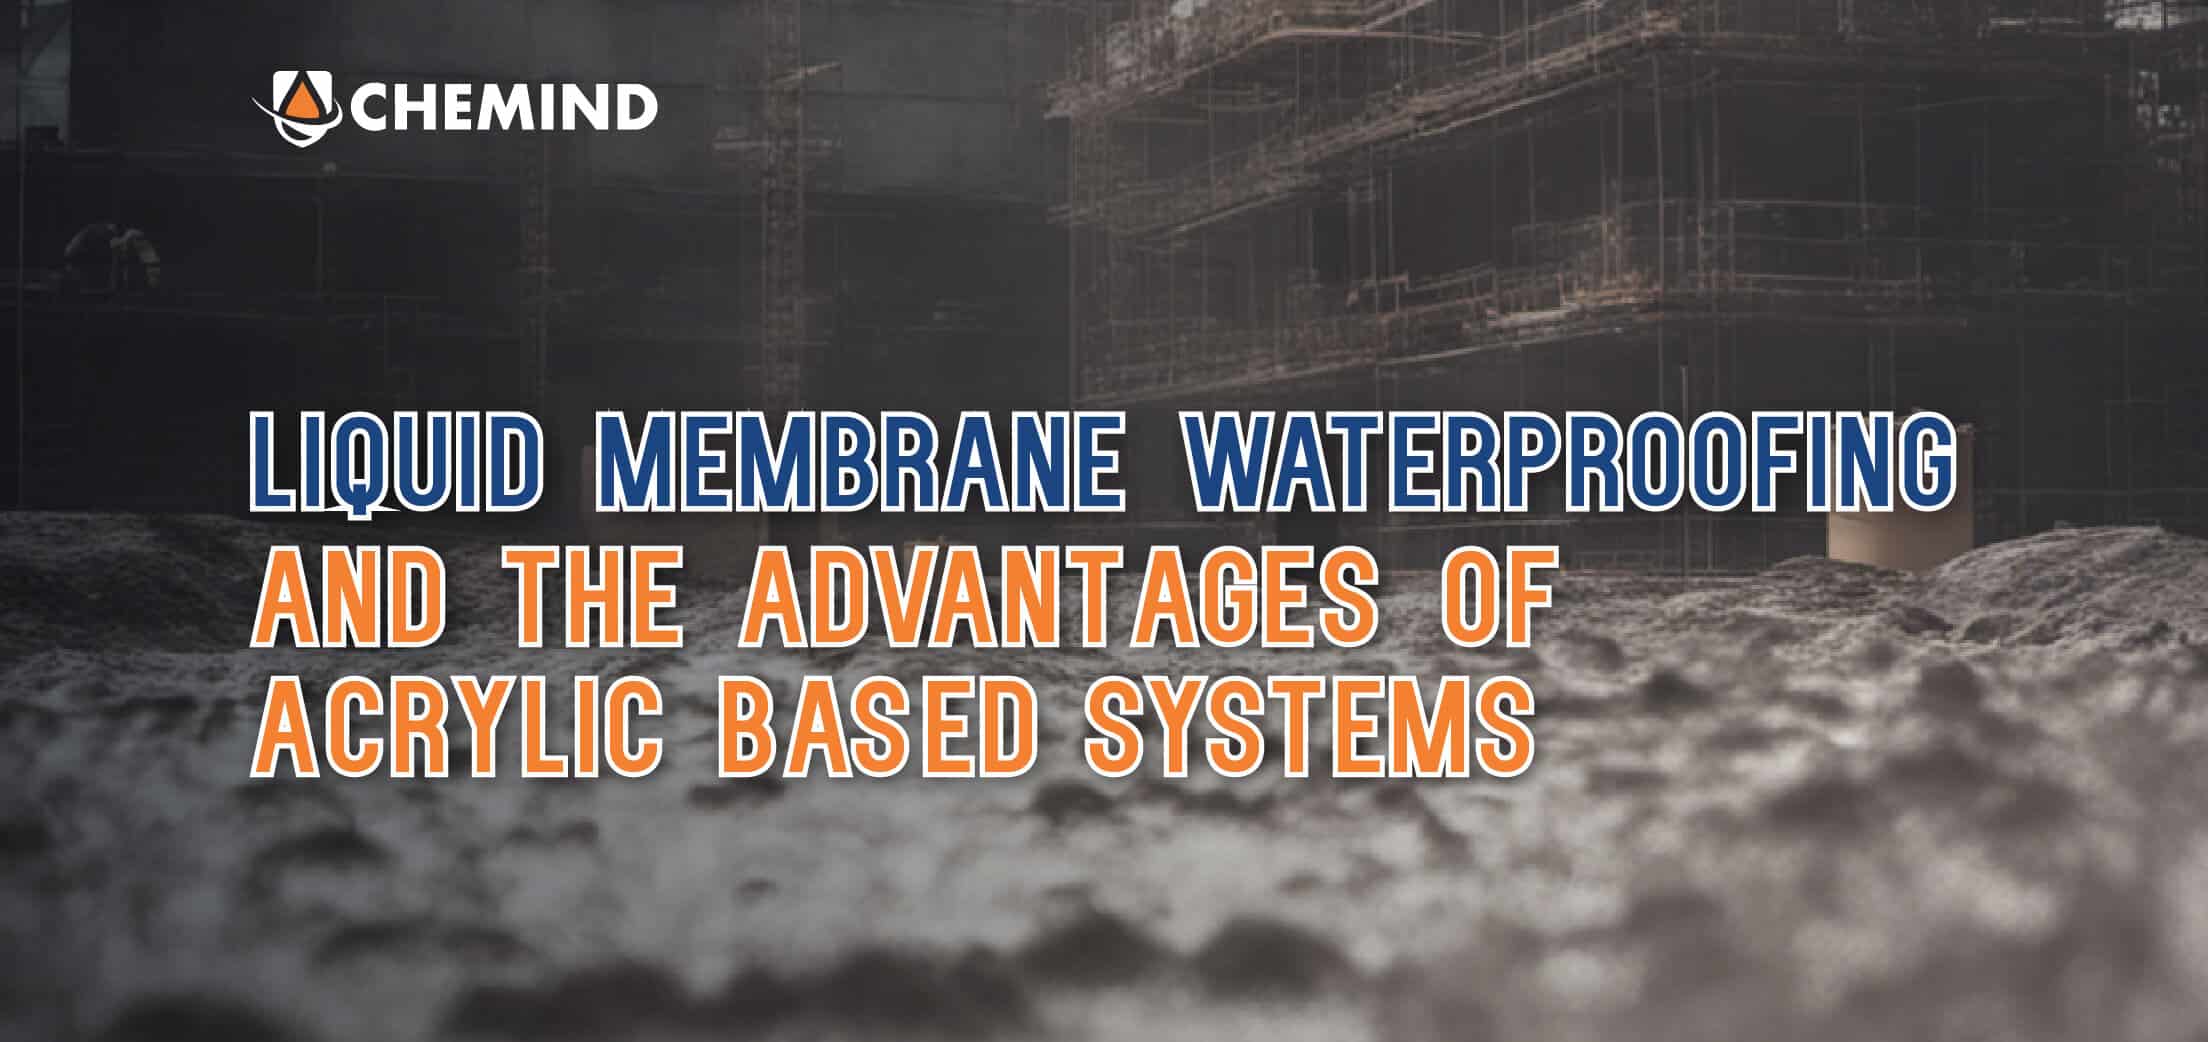 Liquid Membrane Waterproofing and the Advantages of Acrylic-Based Systems